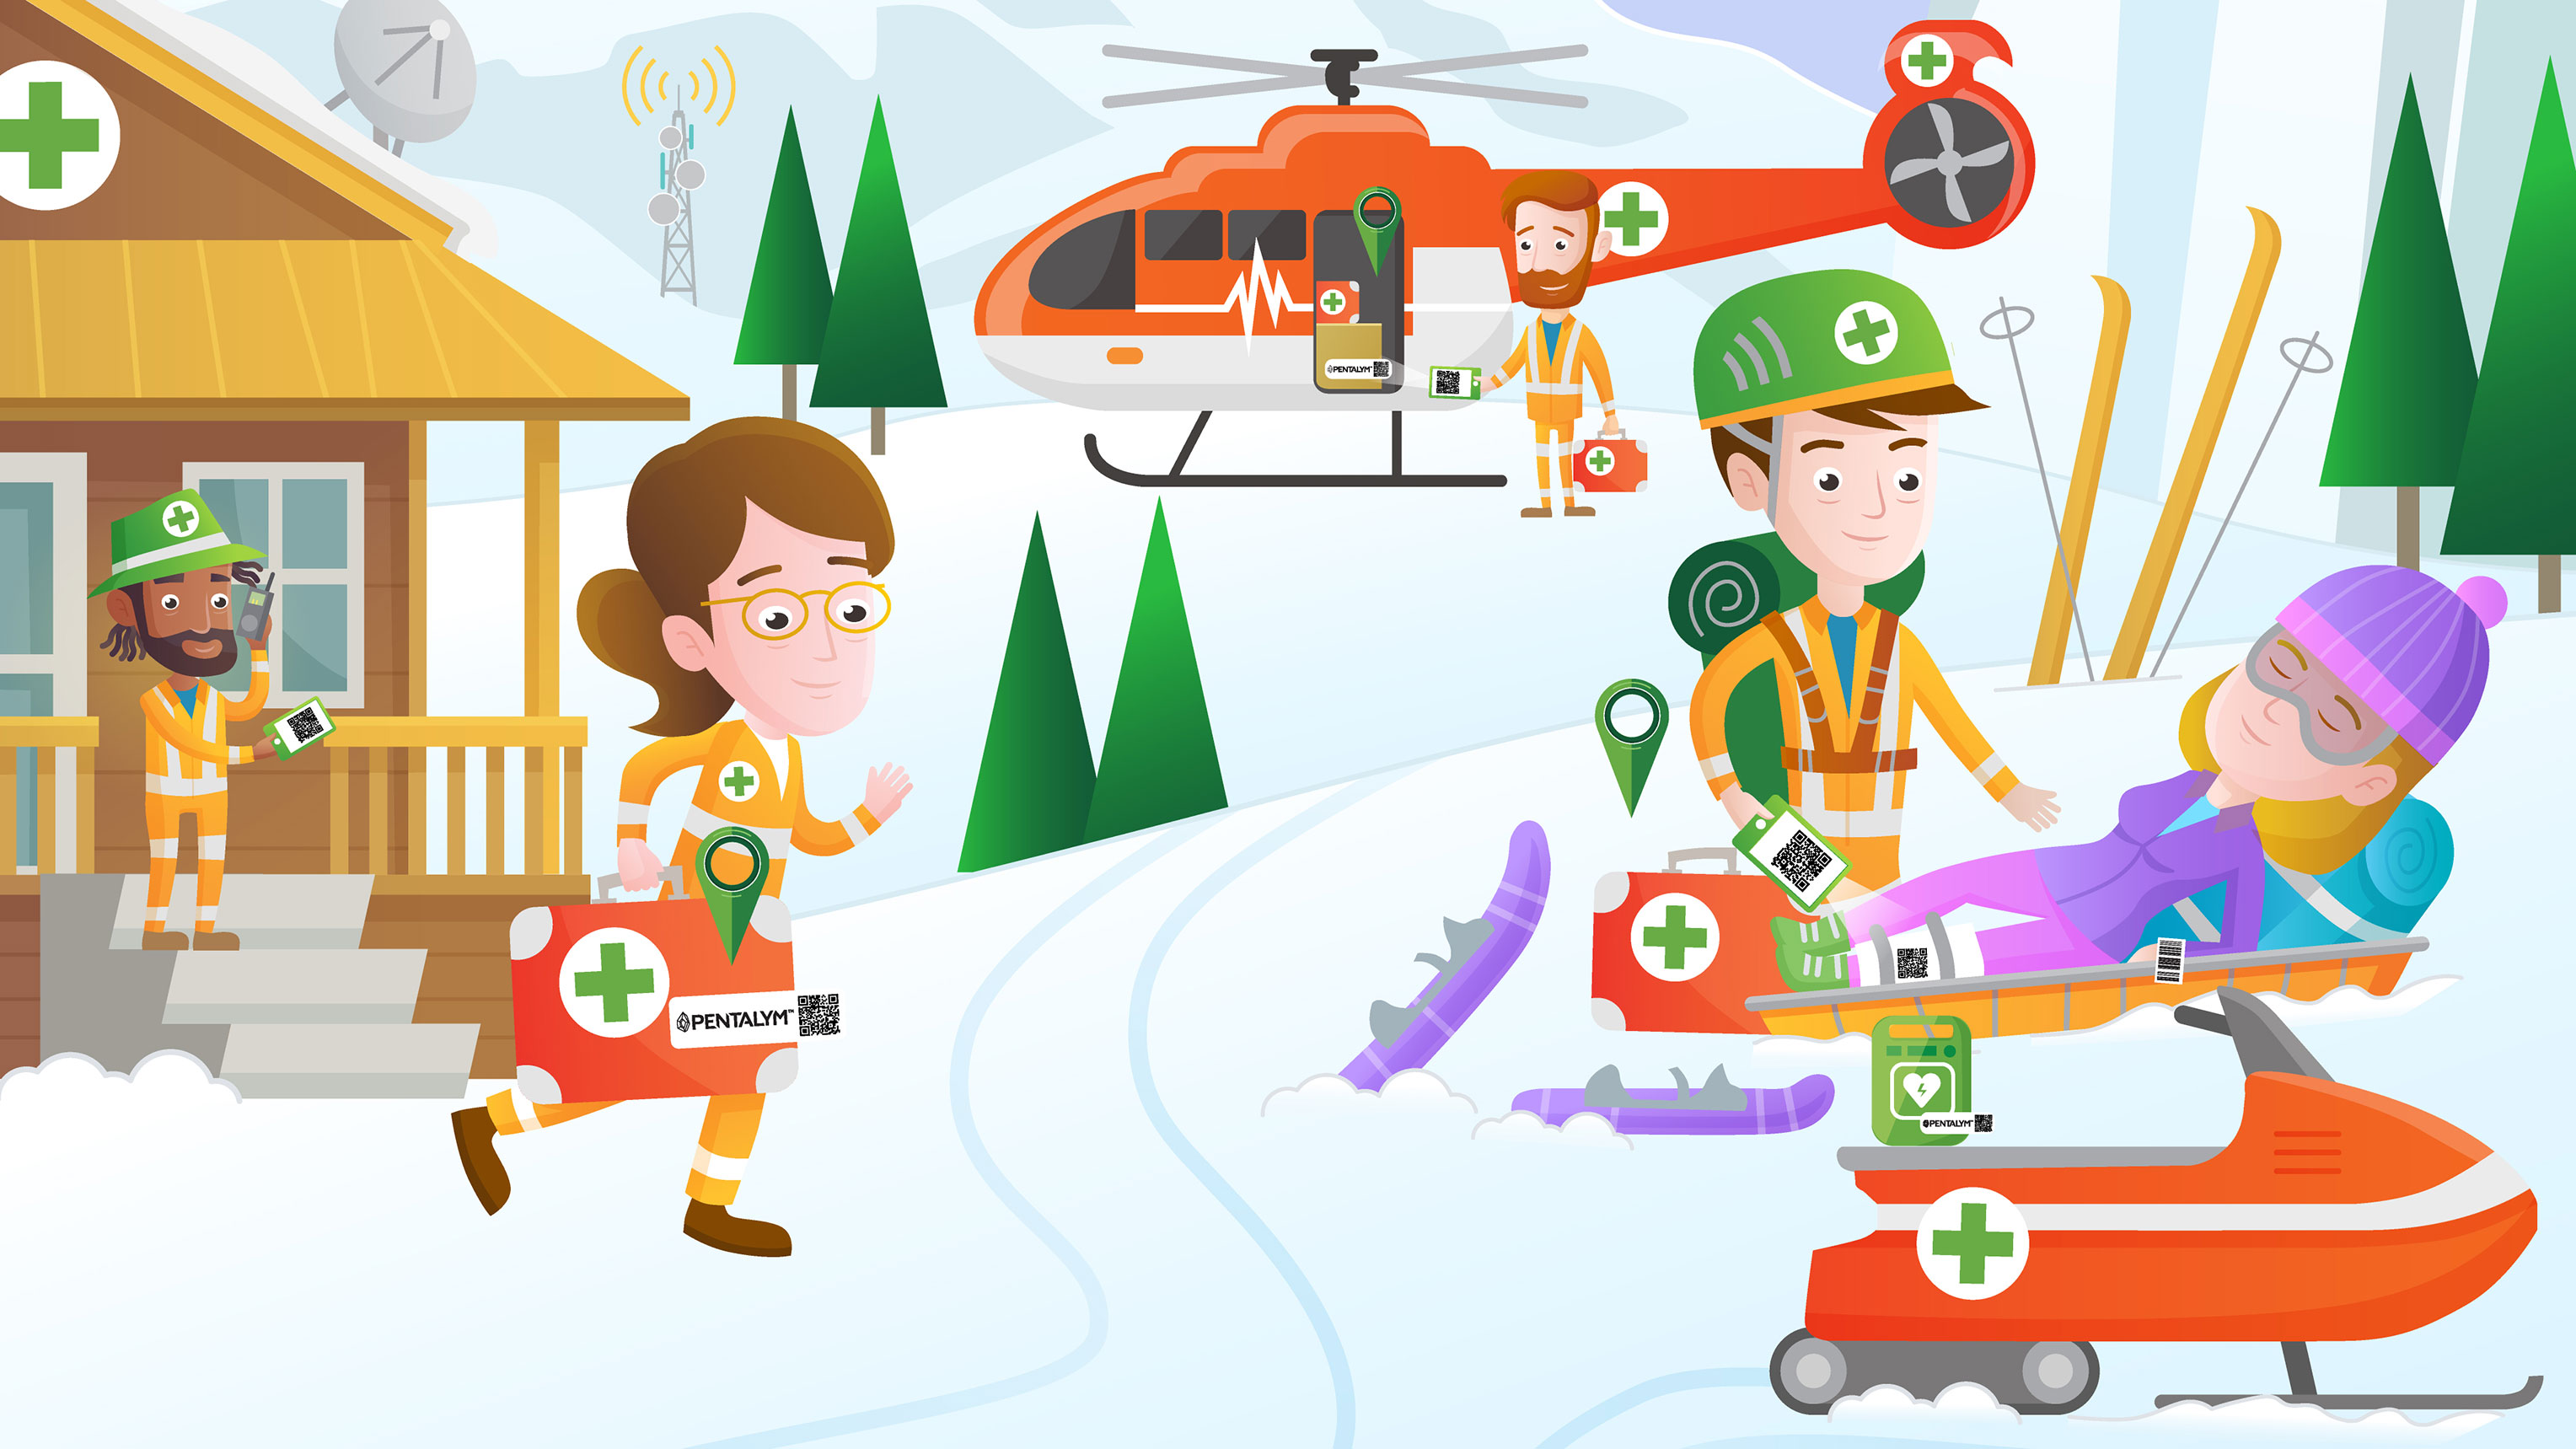 Mountain rescue use case - Time matters